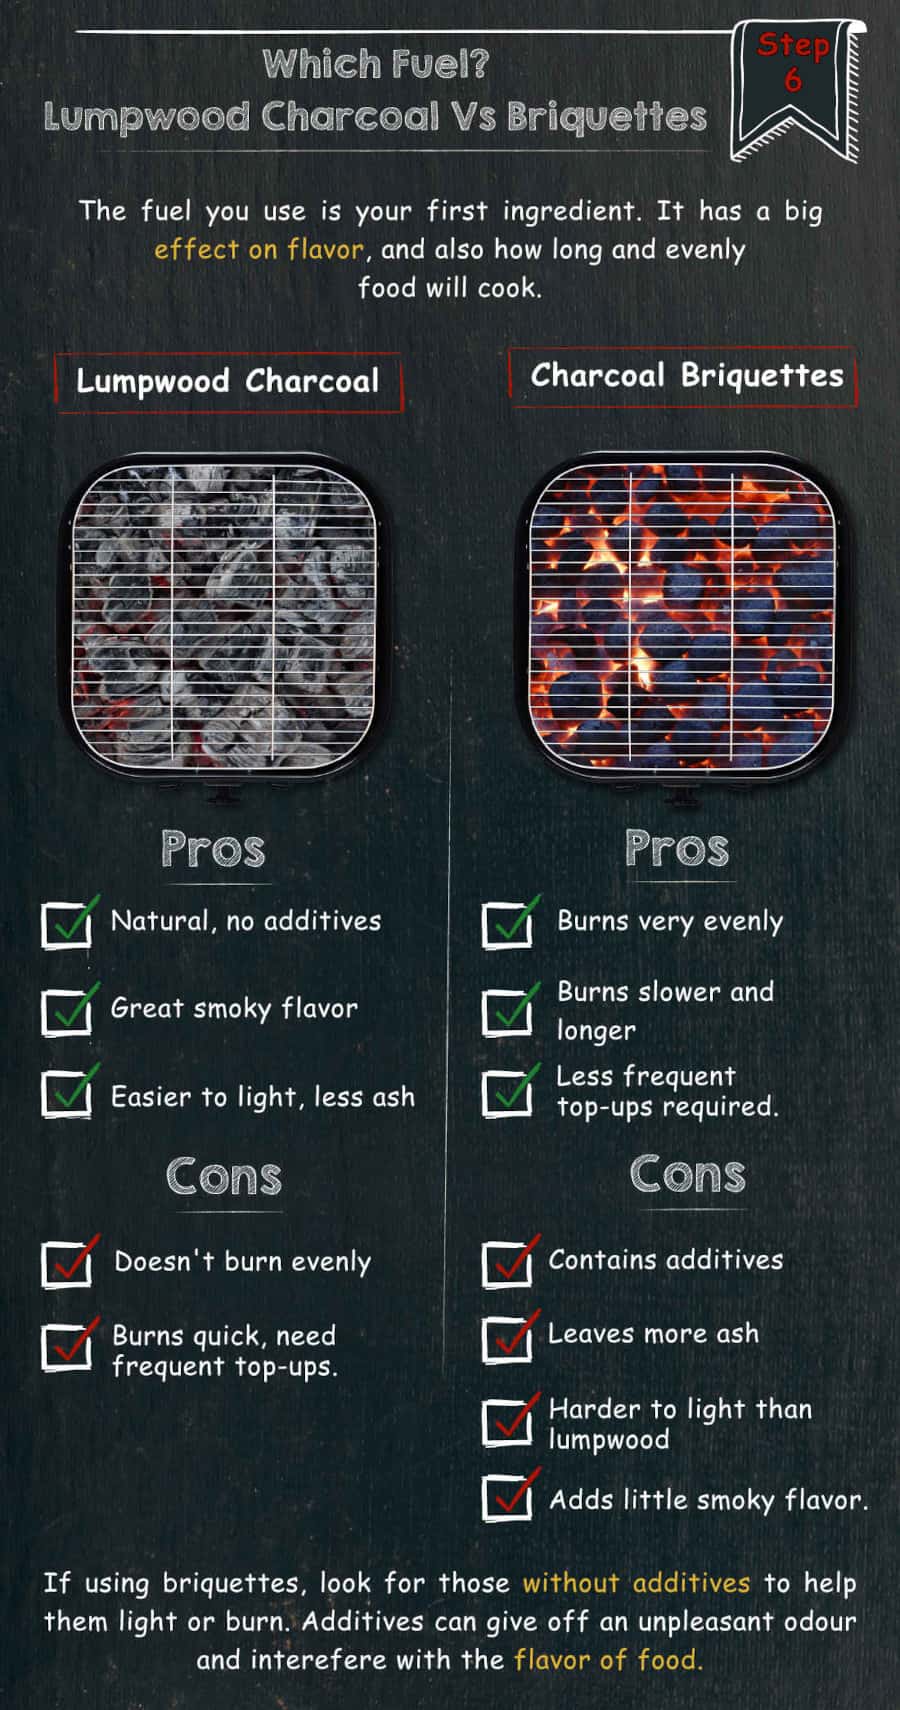 Graphic showing the pros and cons of lump charcoal vs briquet.